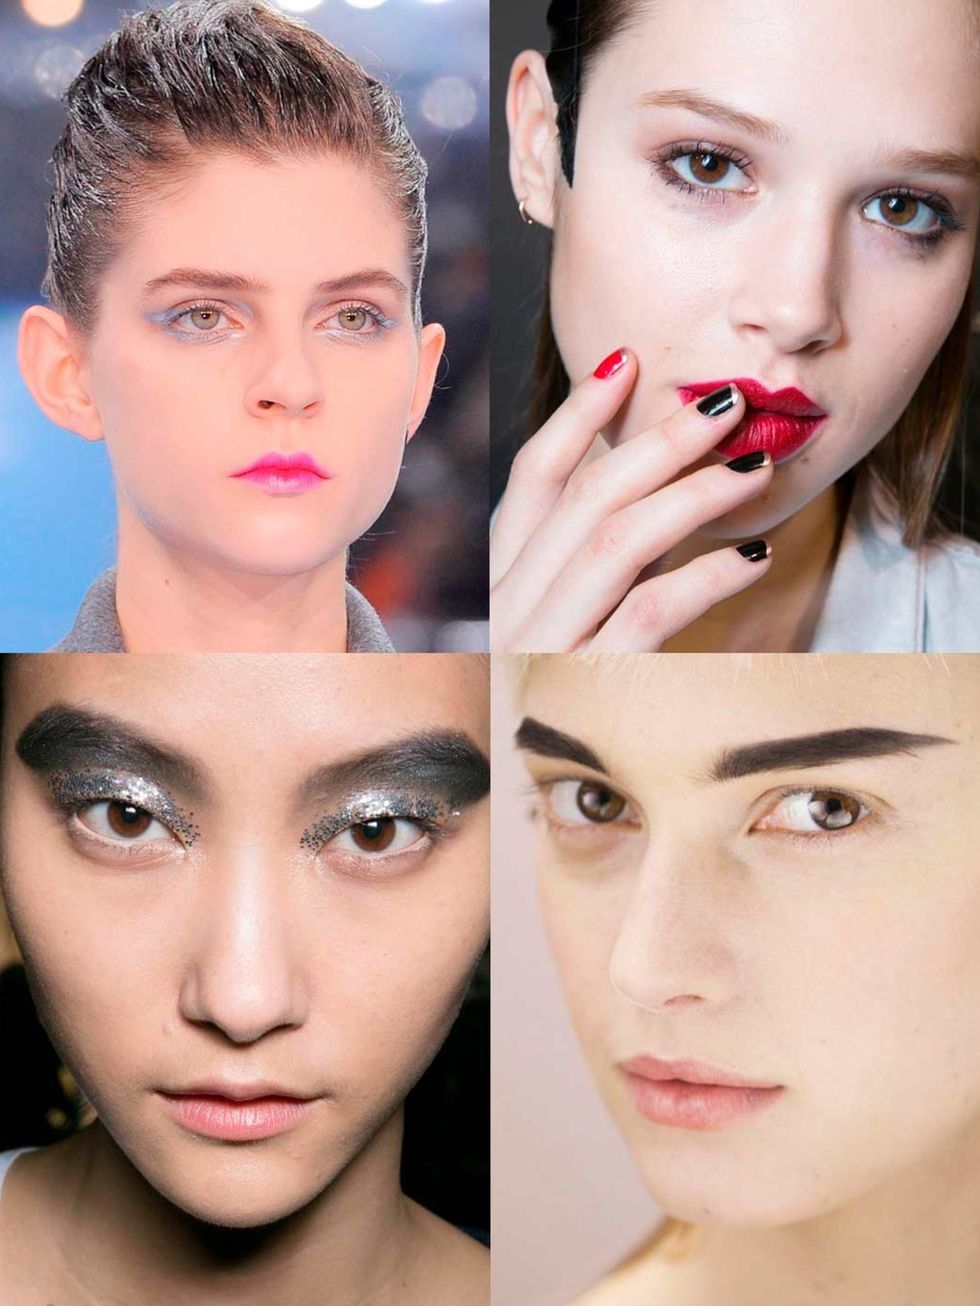 <p>There was a whole lot of nothing at Paris Fashion Week - no make-up make-up looks reigned supreme. But among the beautiful simplicity were looks that were unashamedly bright, edgy and even handsome. </p><p>See our favourite make-up looks from Paris Fas